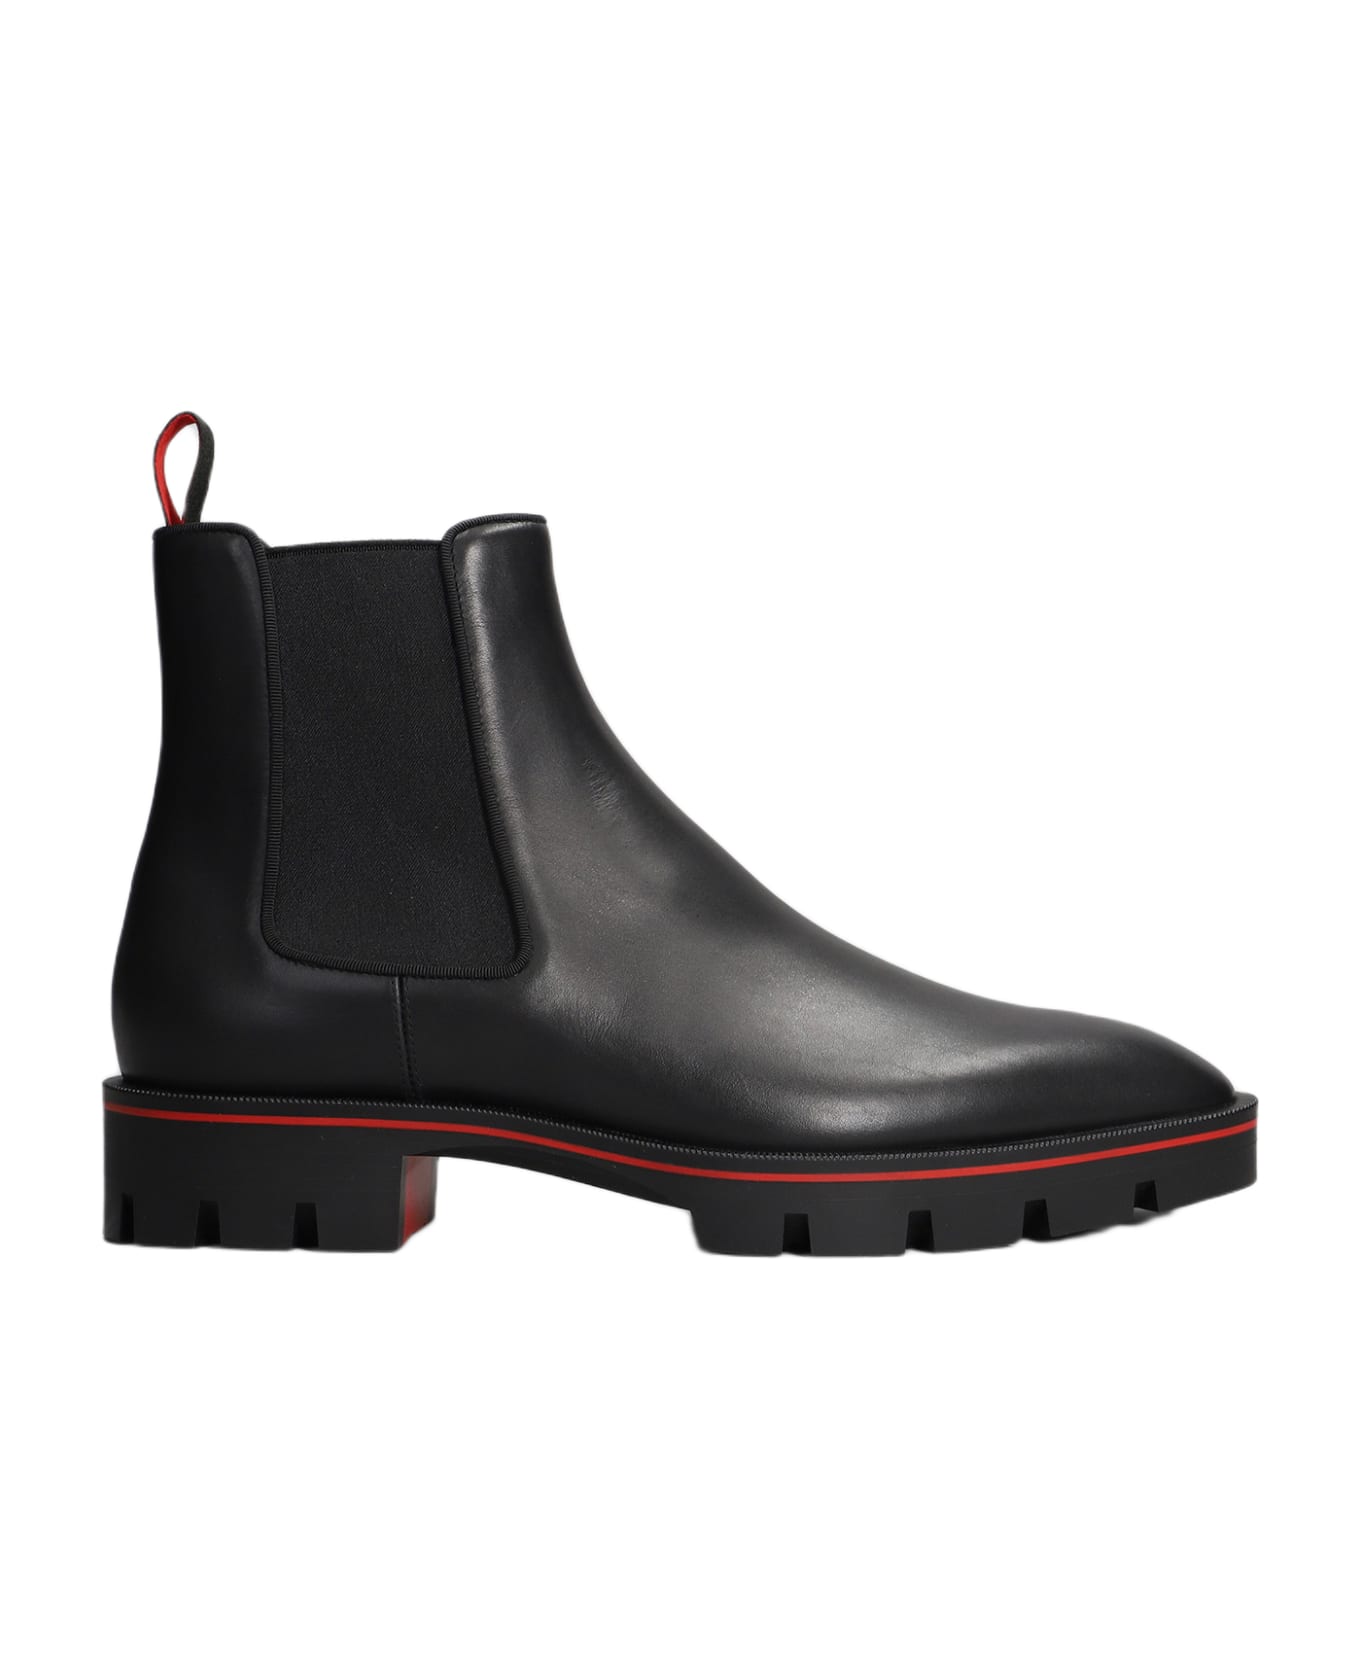 Christian Louboutin Alpinosol Ankle Boot In Calf Leather - BLACK ブーツ